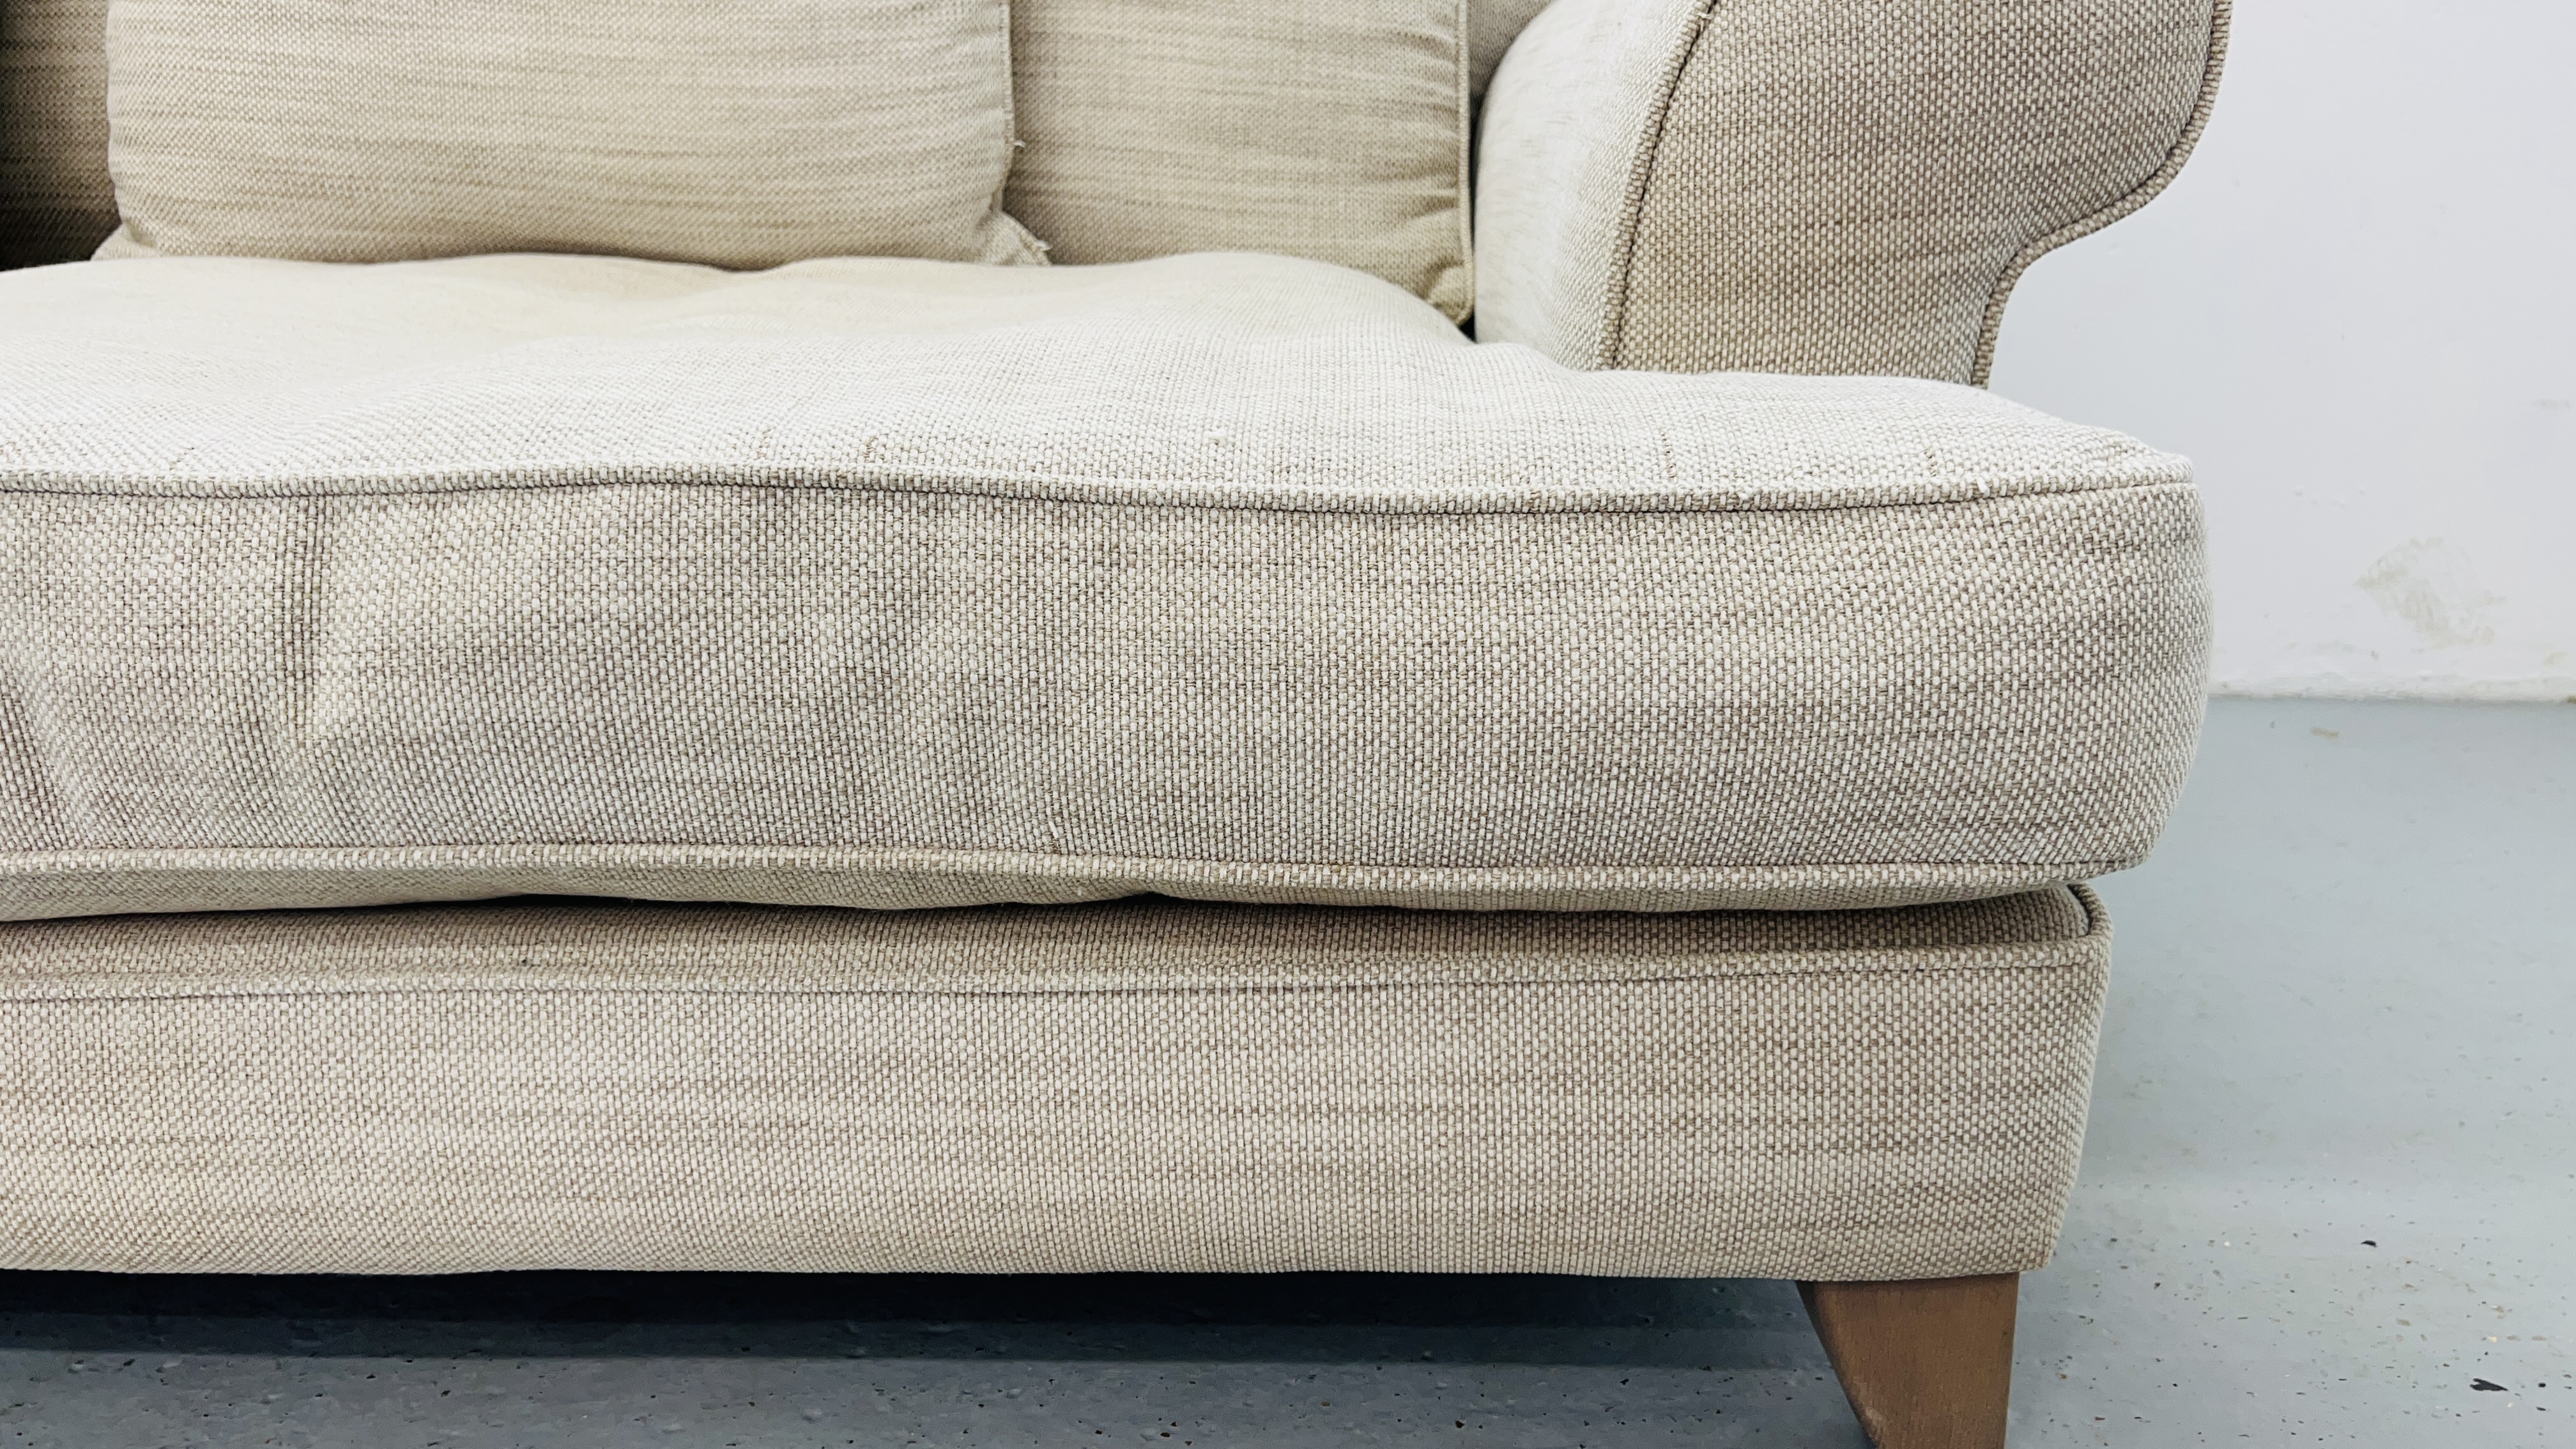 A PAIR OF "THE LOUNGE Co" OATMEAL UPHOLSTERED SOFA'S EACH LENGTH 210CM. - Image 17 of 22